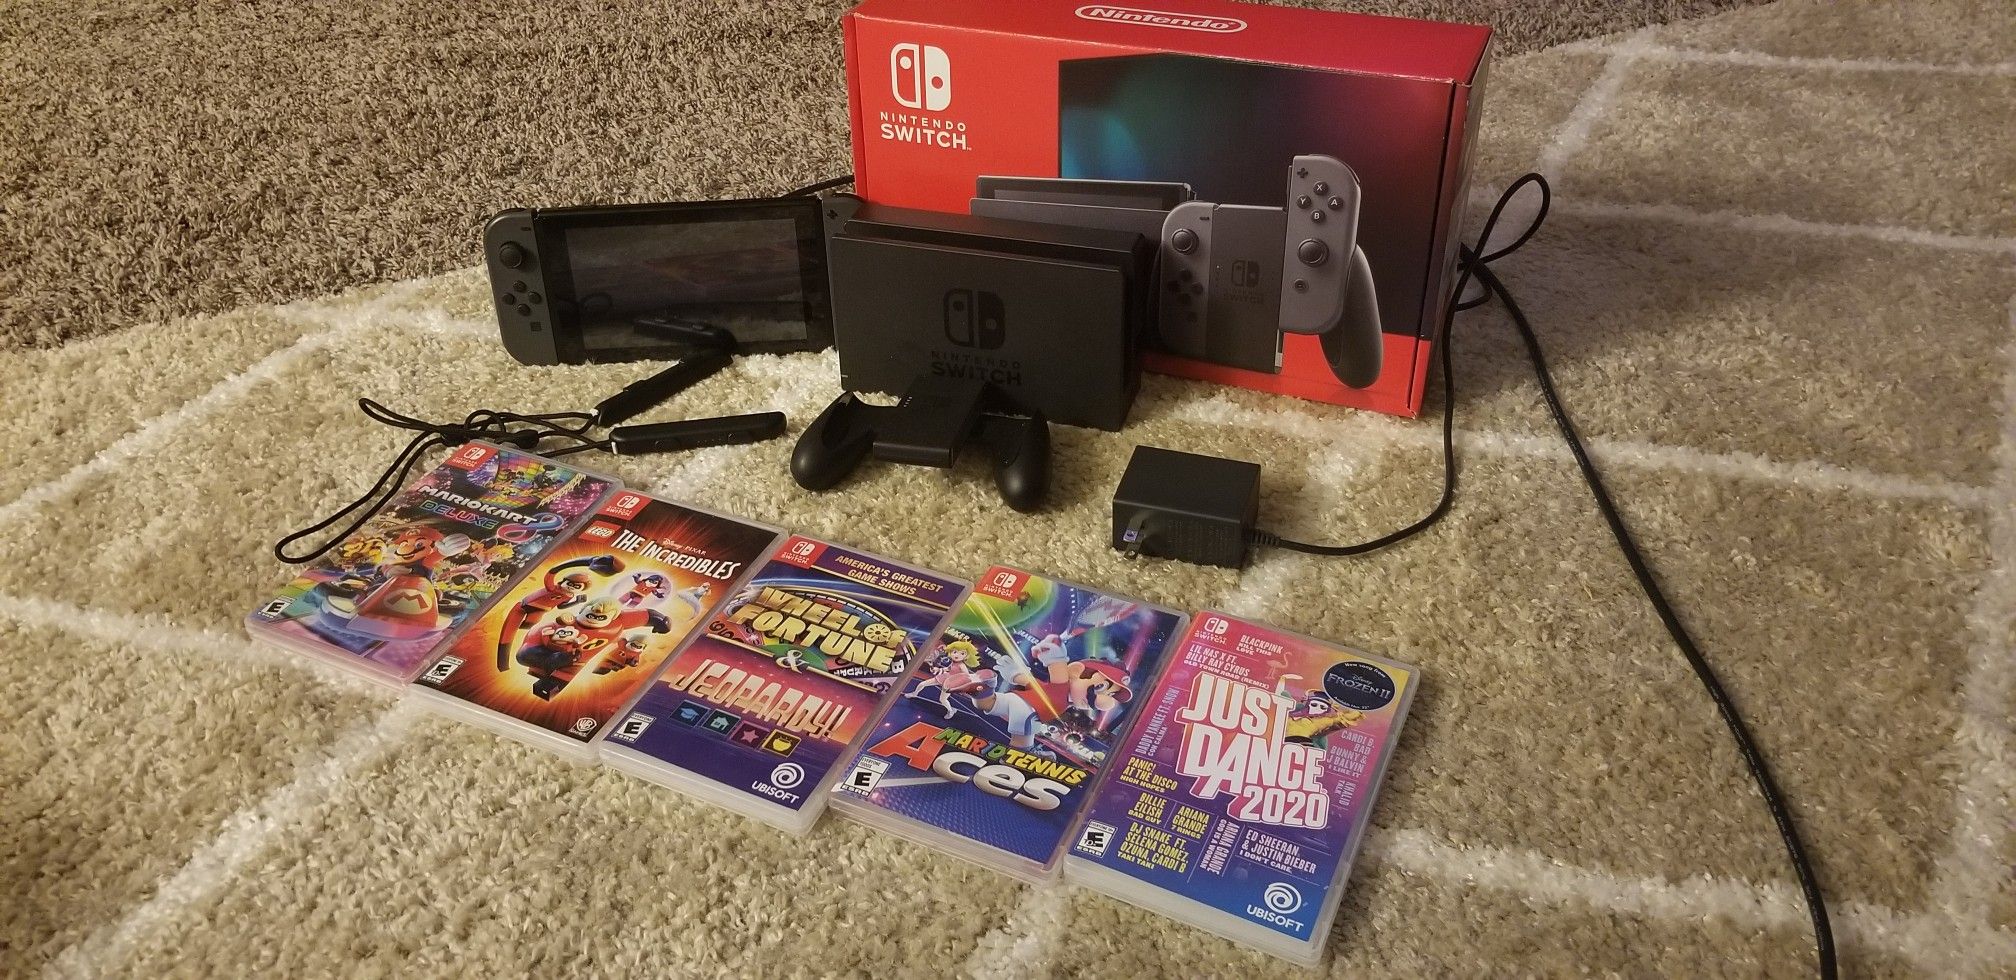 Nintendo Switch (Gently used) and 5 games